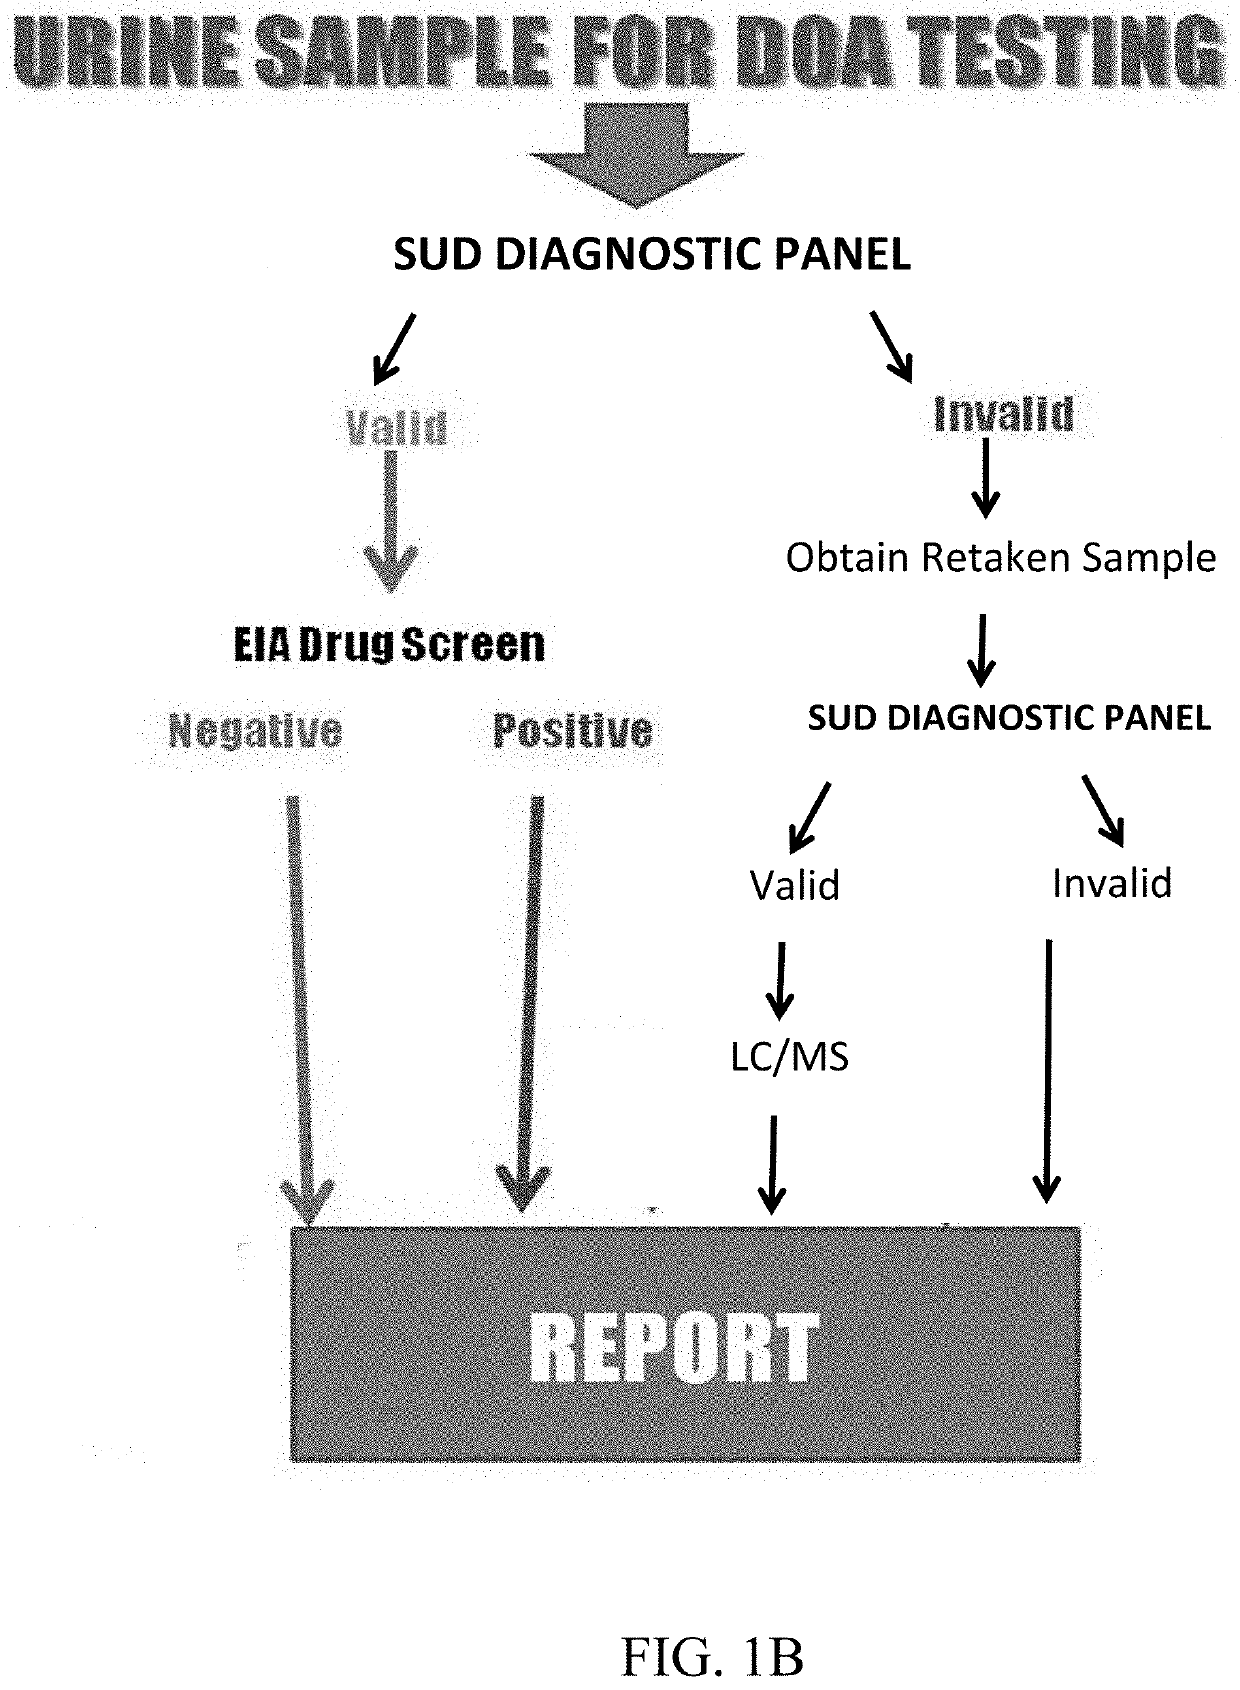 Assays and methods for diagnosing substance use disorder